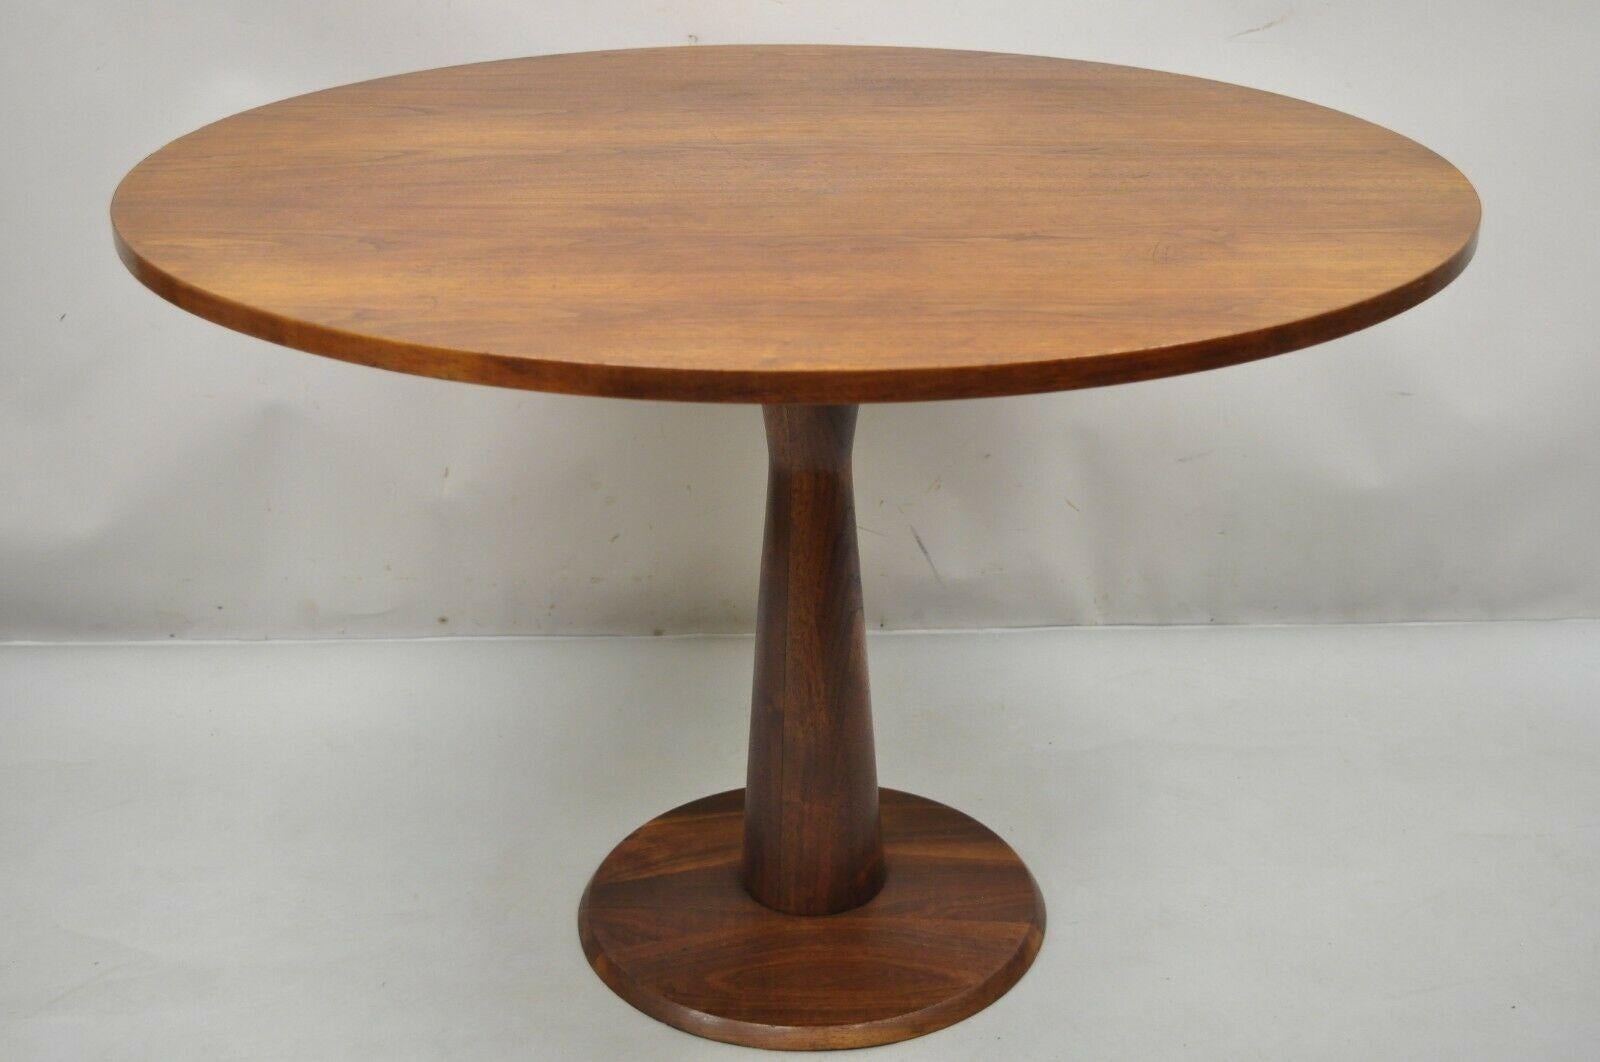 Mid-Century Modern walnut round dining table with hourglass pedestal base. Item features an hourglass shaped pedestal base, 42